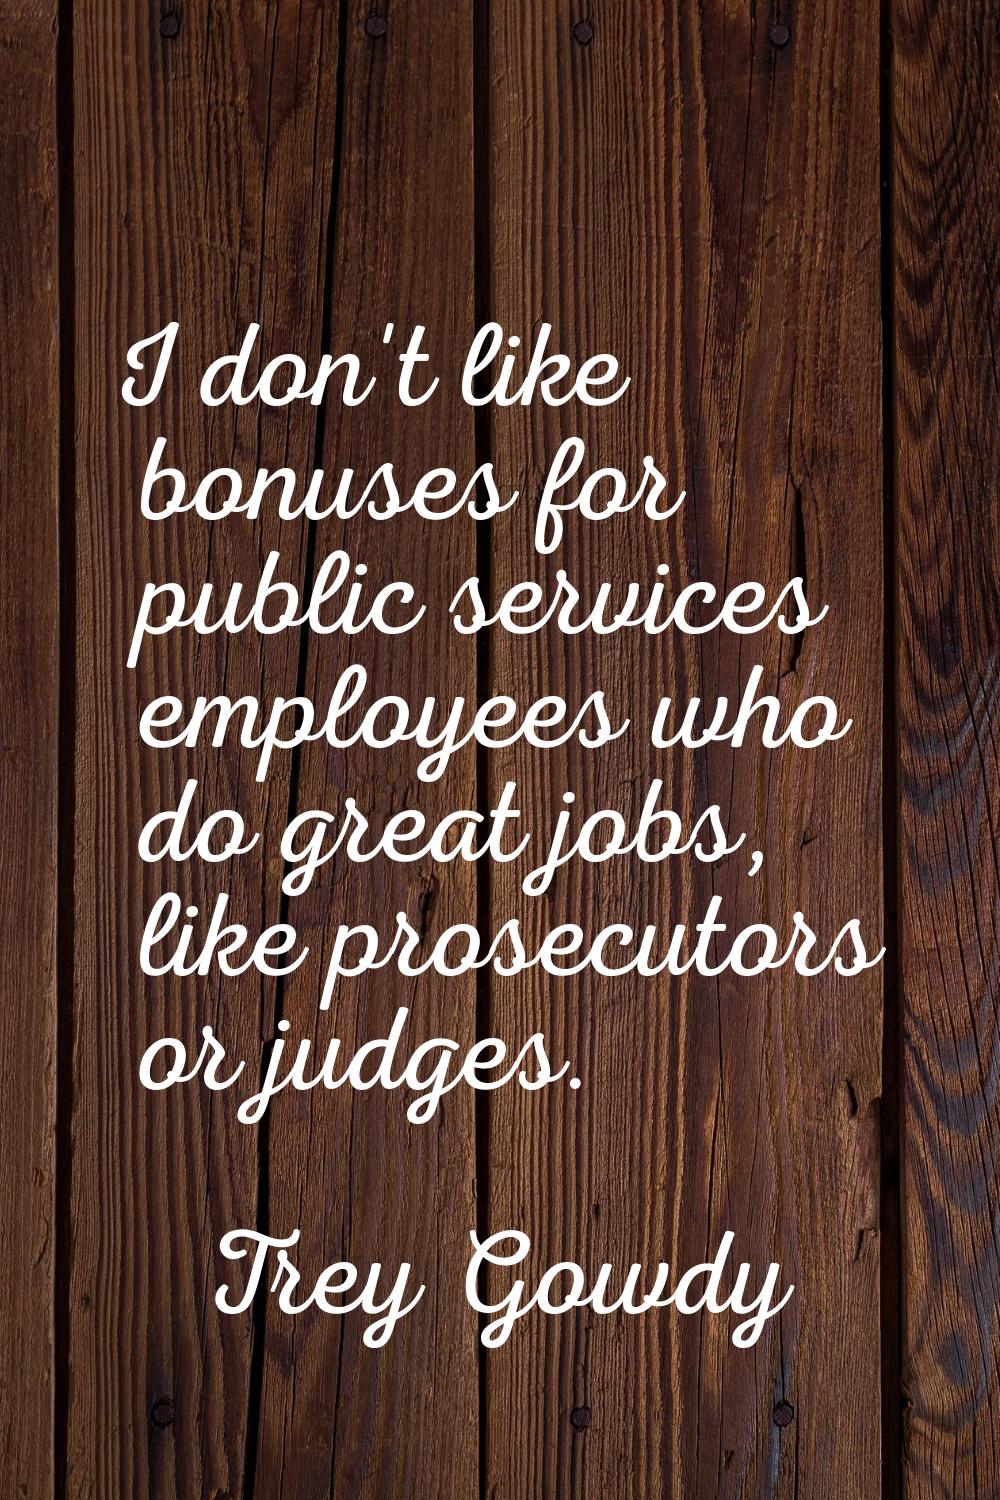 I don't like bonuses for public services employees who do great jobs, like prosecutors or judges.